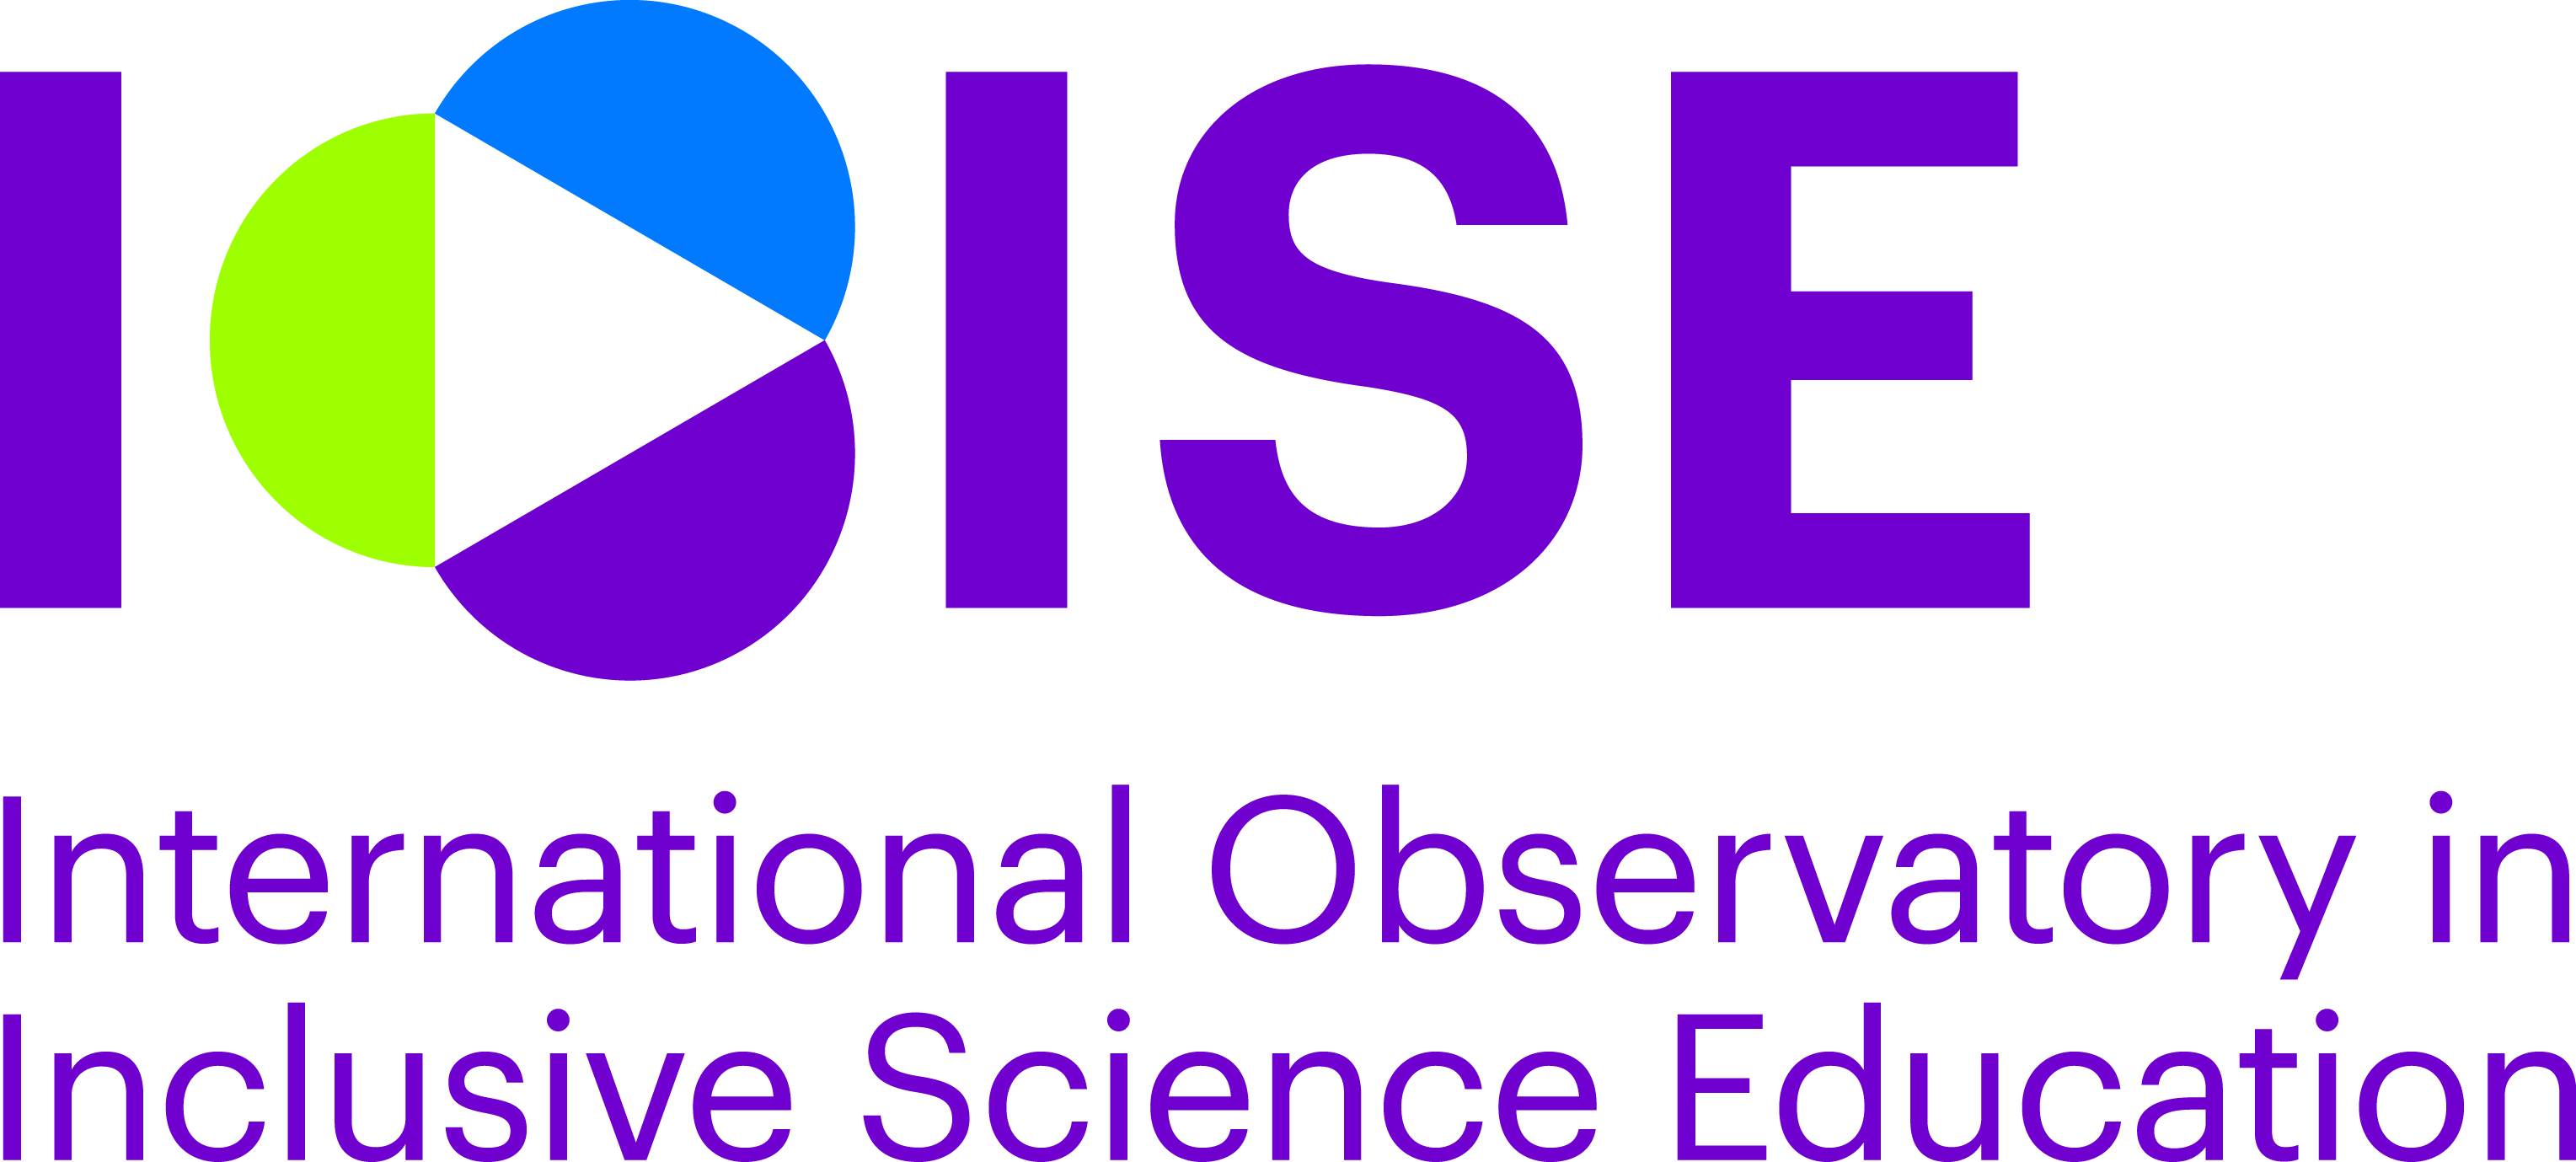 The International Observatory on Inclusive Science Education